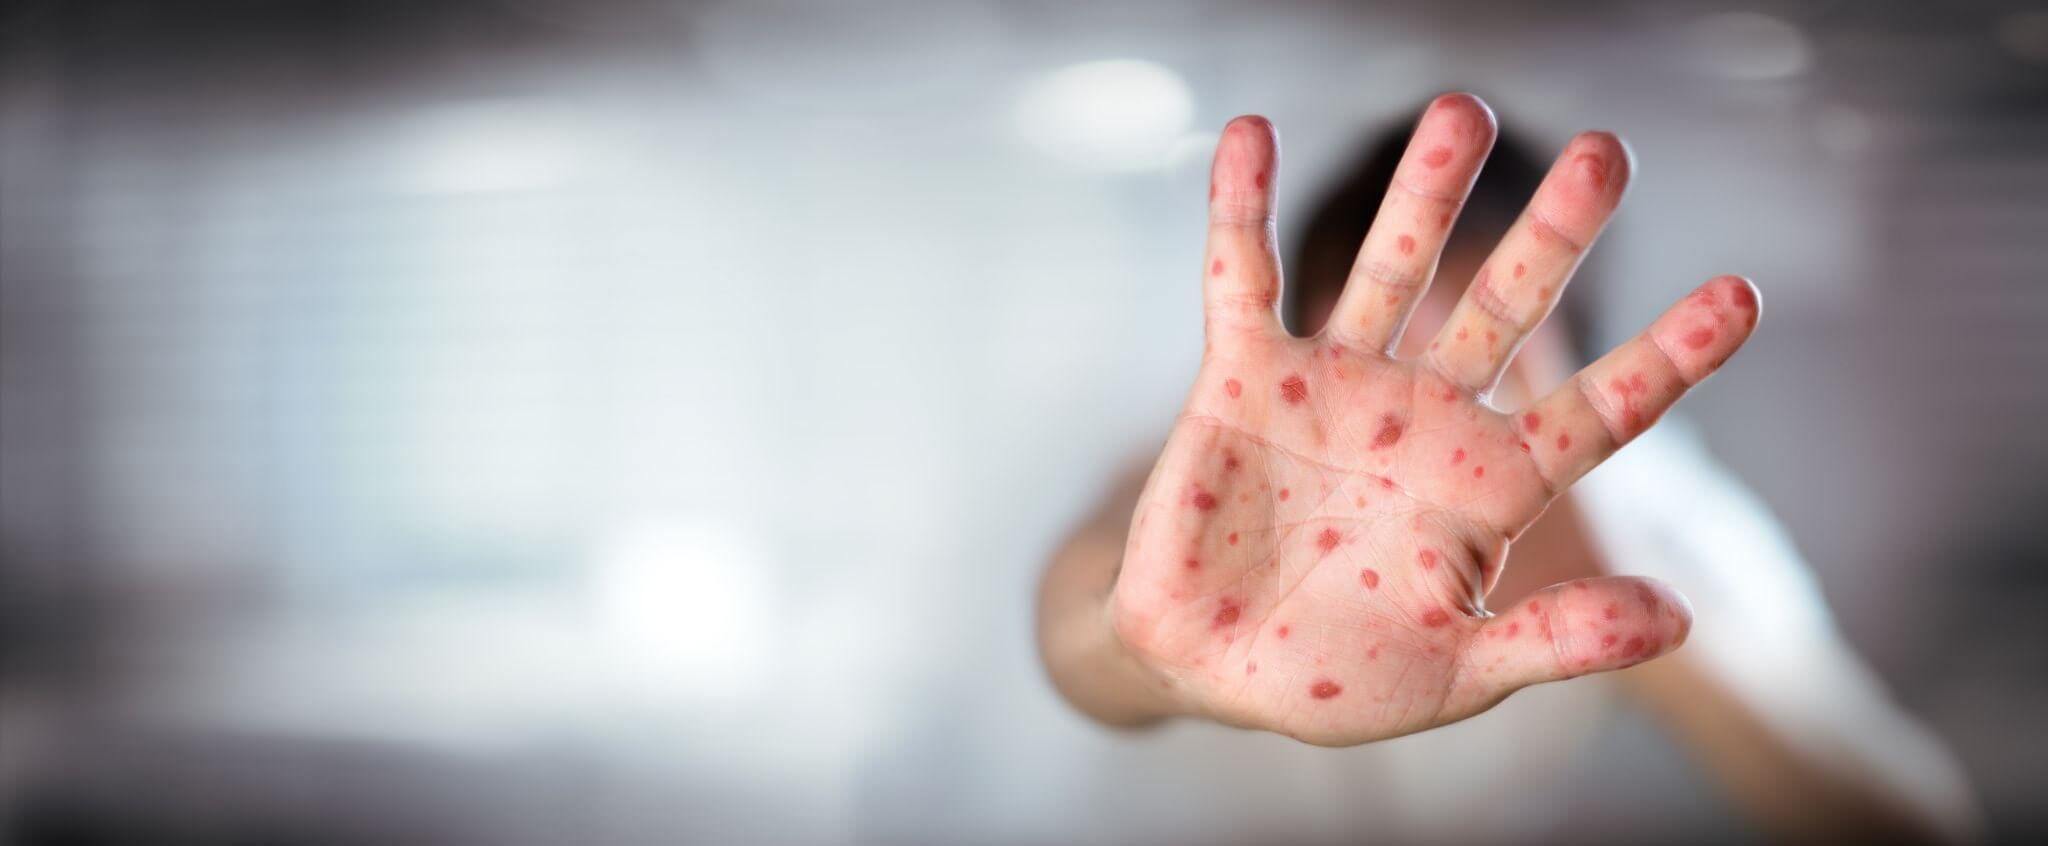 spots on a hand indicating measles or chickenpox